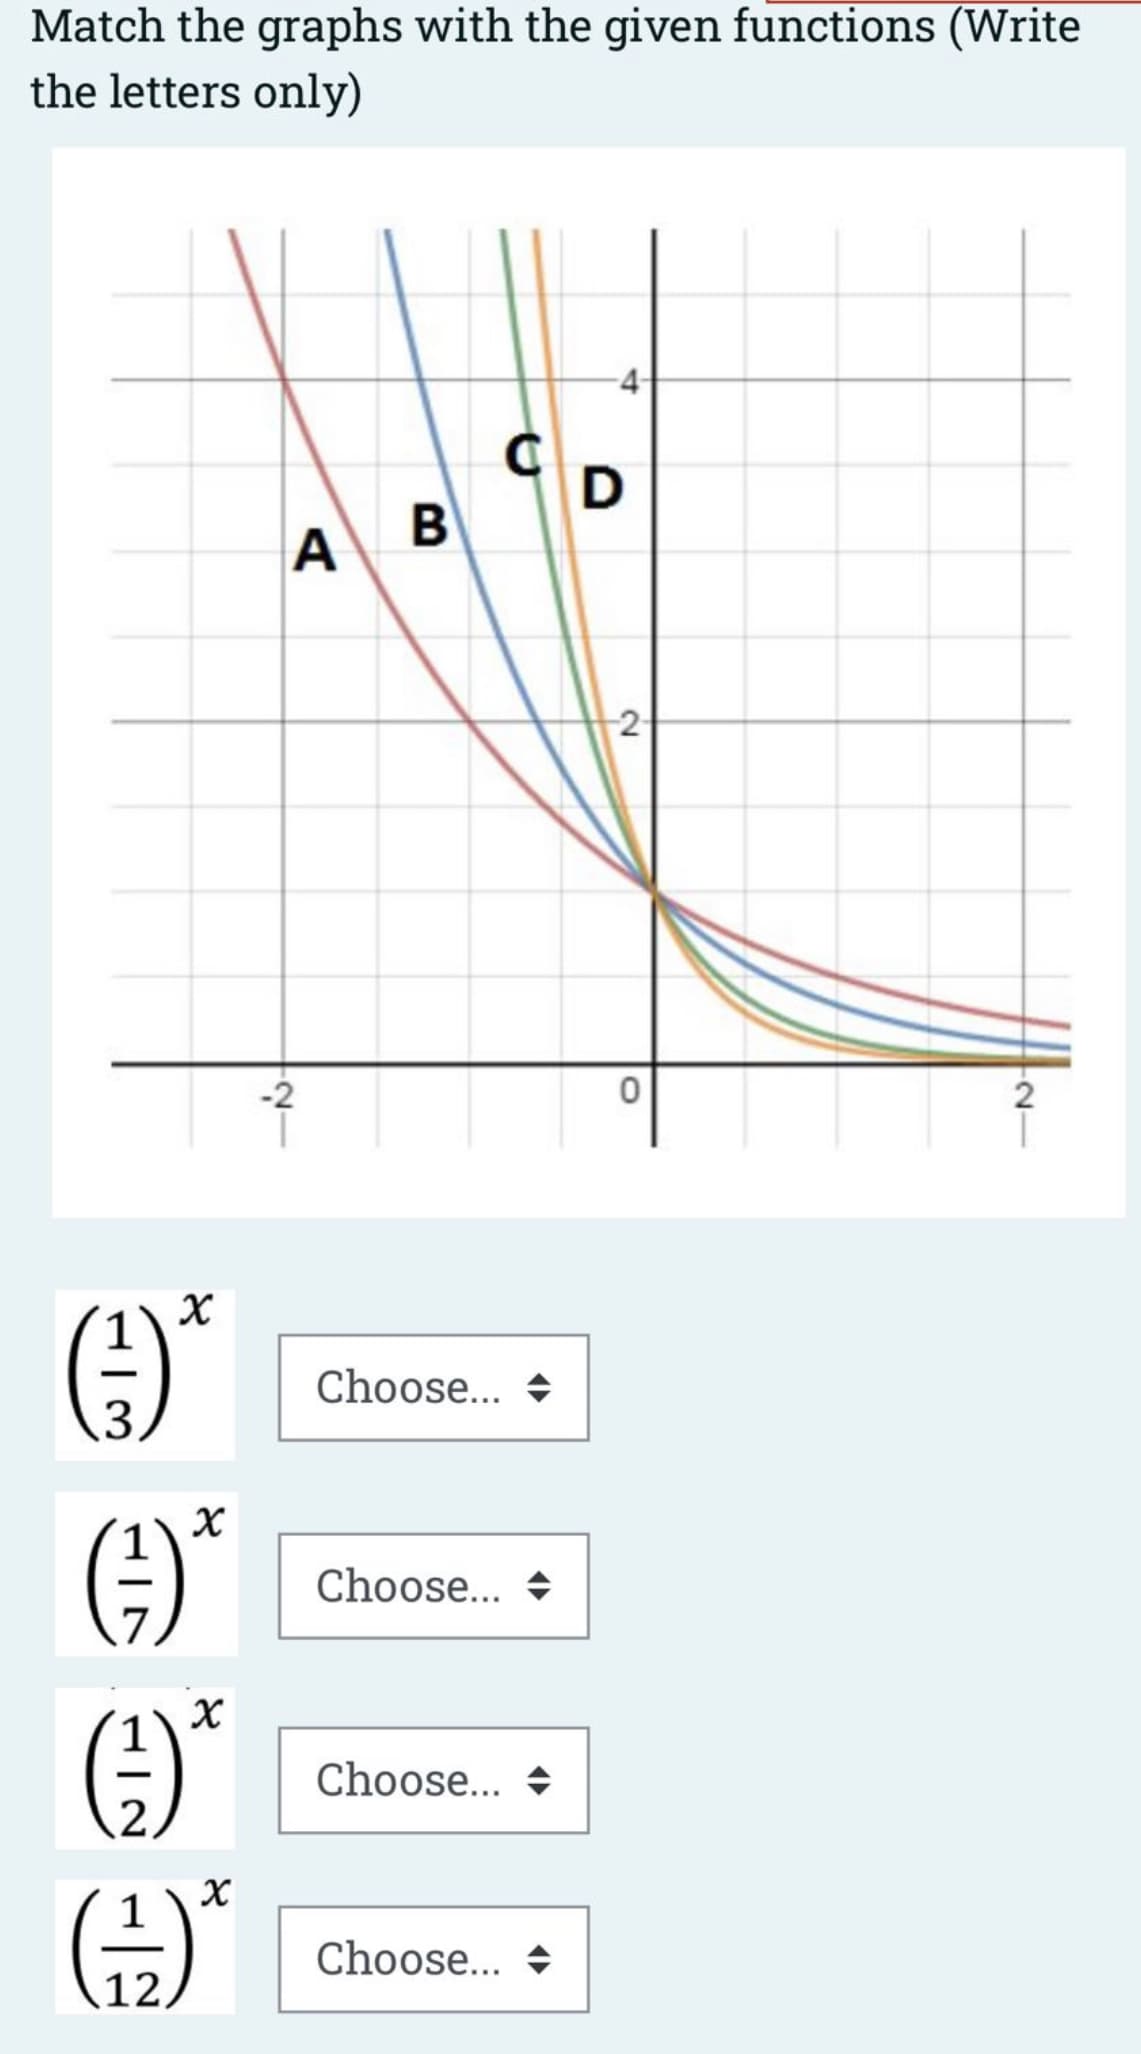 Match the graphs with the given functions (Write
the letters only)
4-
A B
2-
-2
2
)*
Choose... +
3.
Choose... +
Choose... +
1
Choose... +
12,
